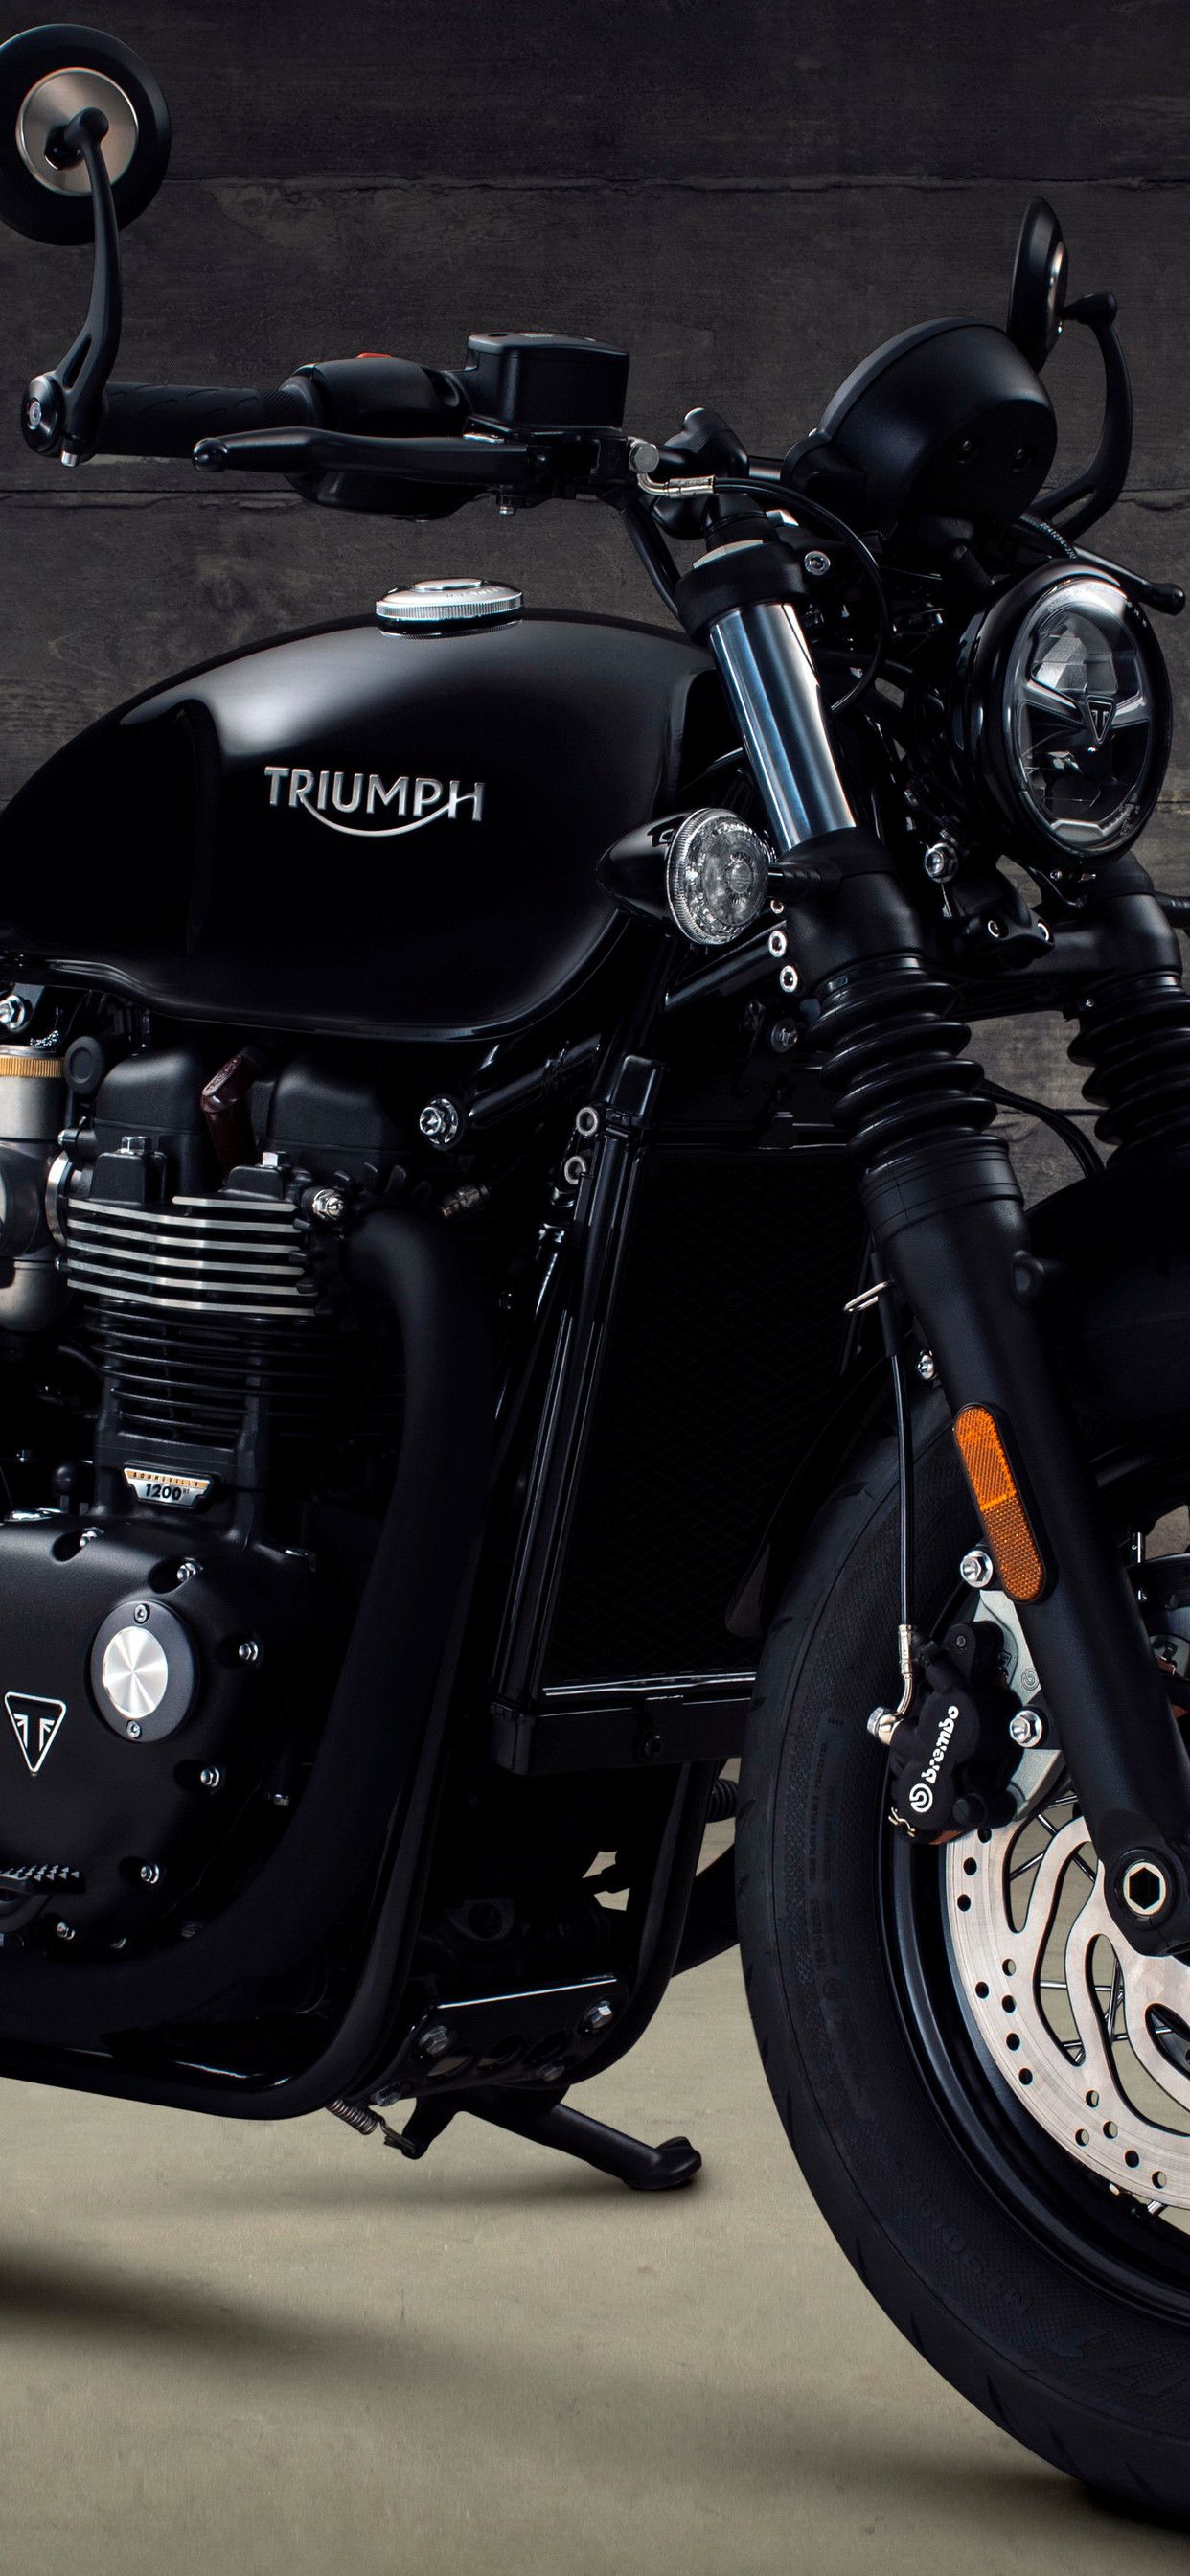 Triumph Motorcycle Wallpapers on WallpaperDog